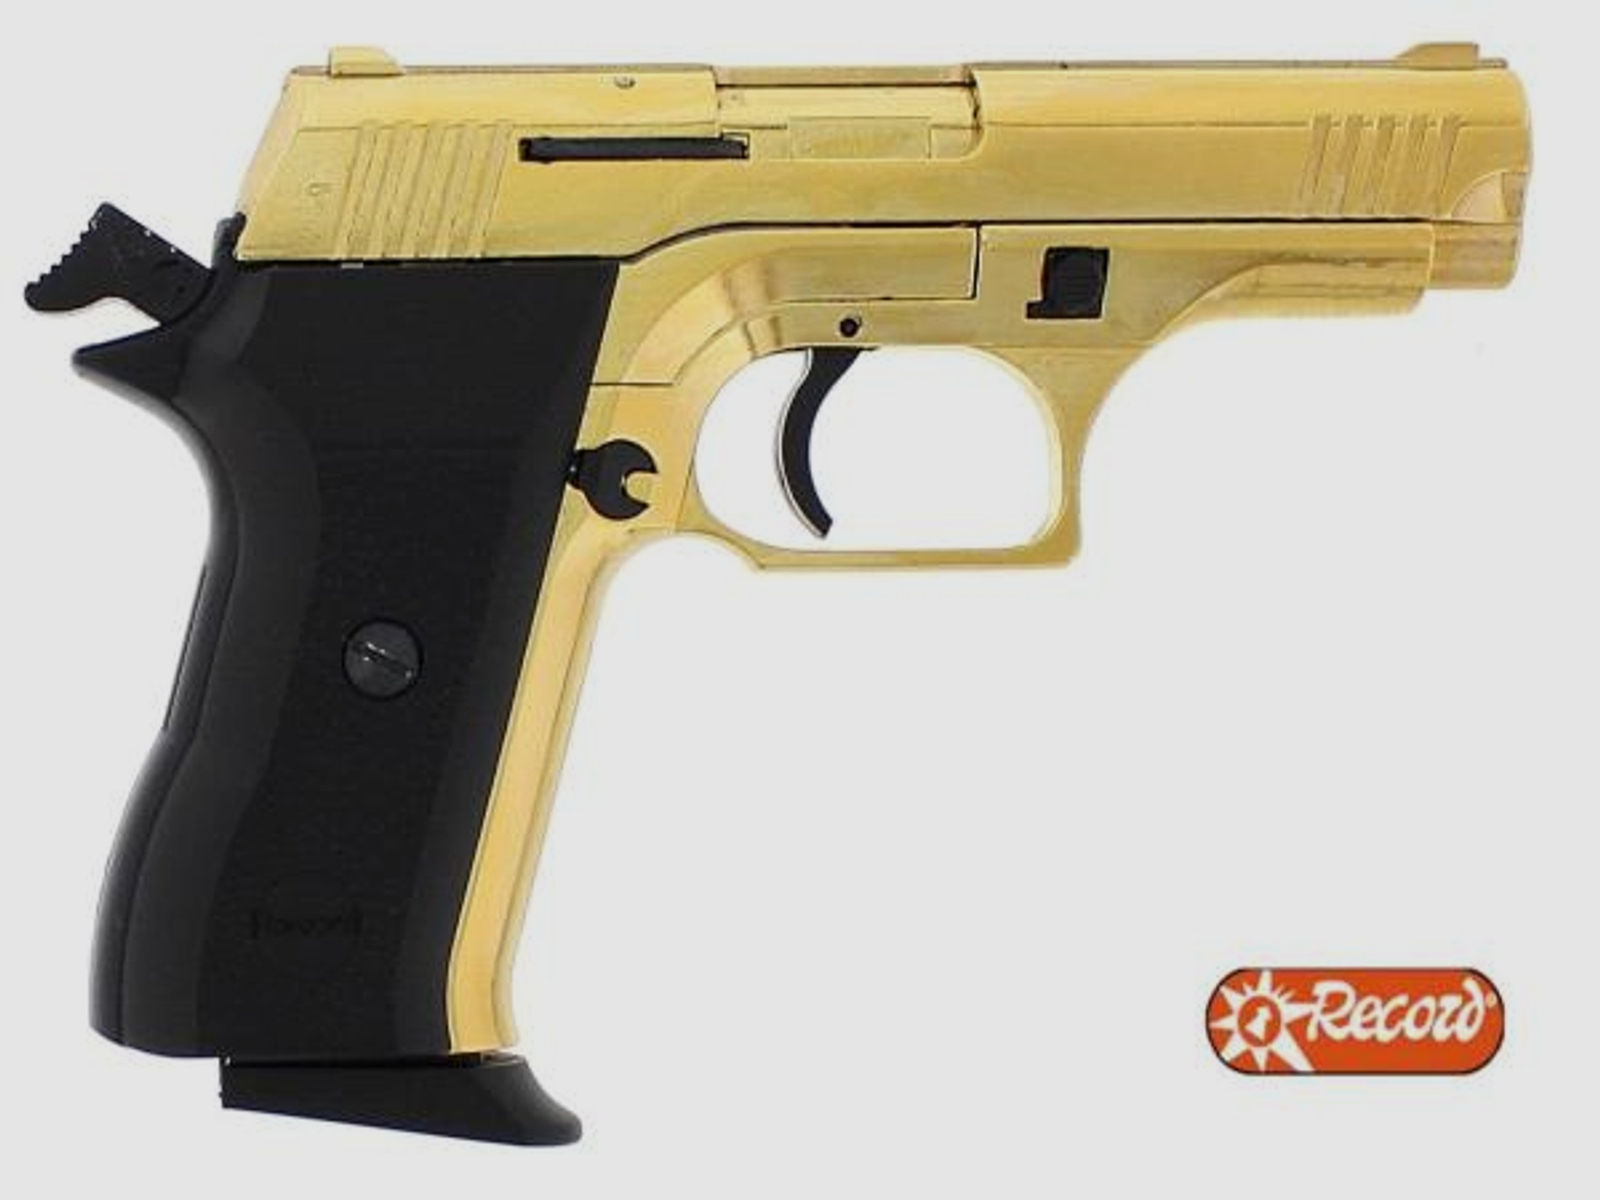 RECORD Gaspistole (SRS) 2015 Gold Kal. 9mm P.A.